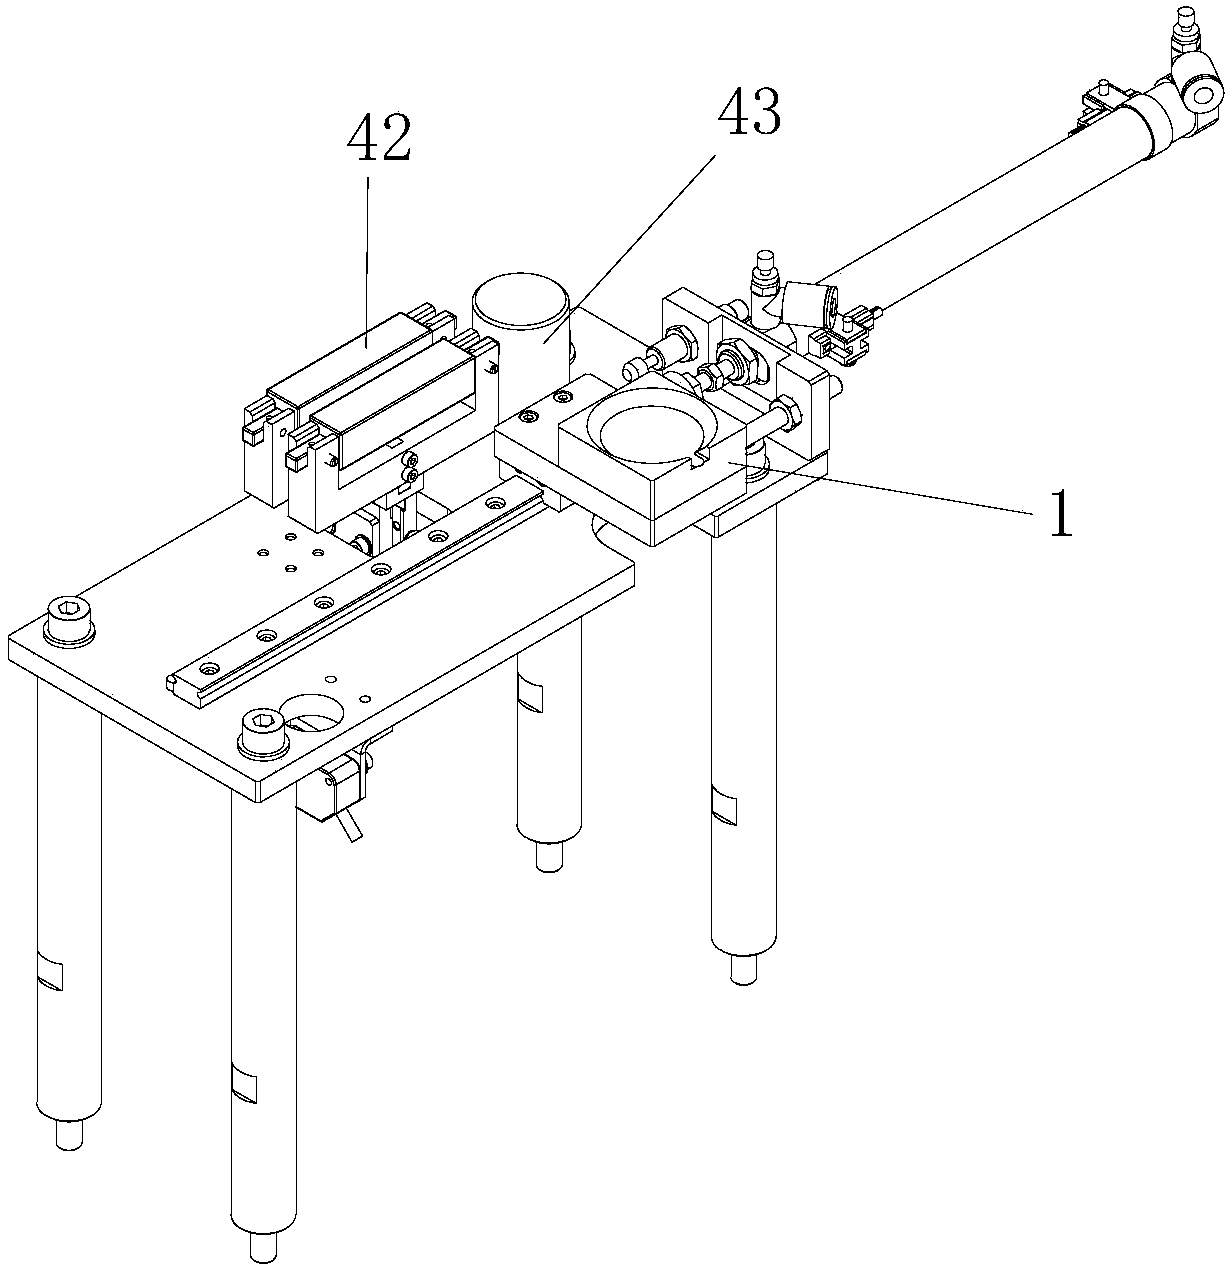 Lens dispensing and pressure maintaining equipment and method